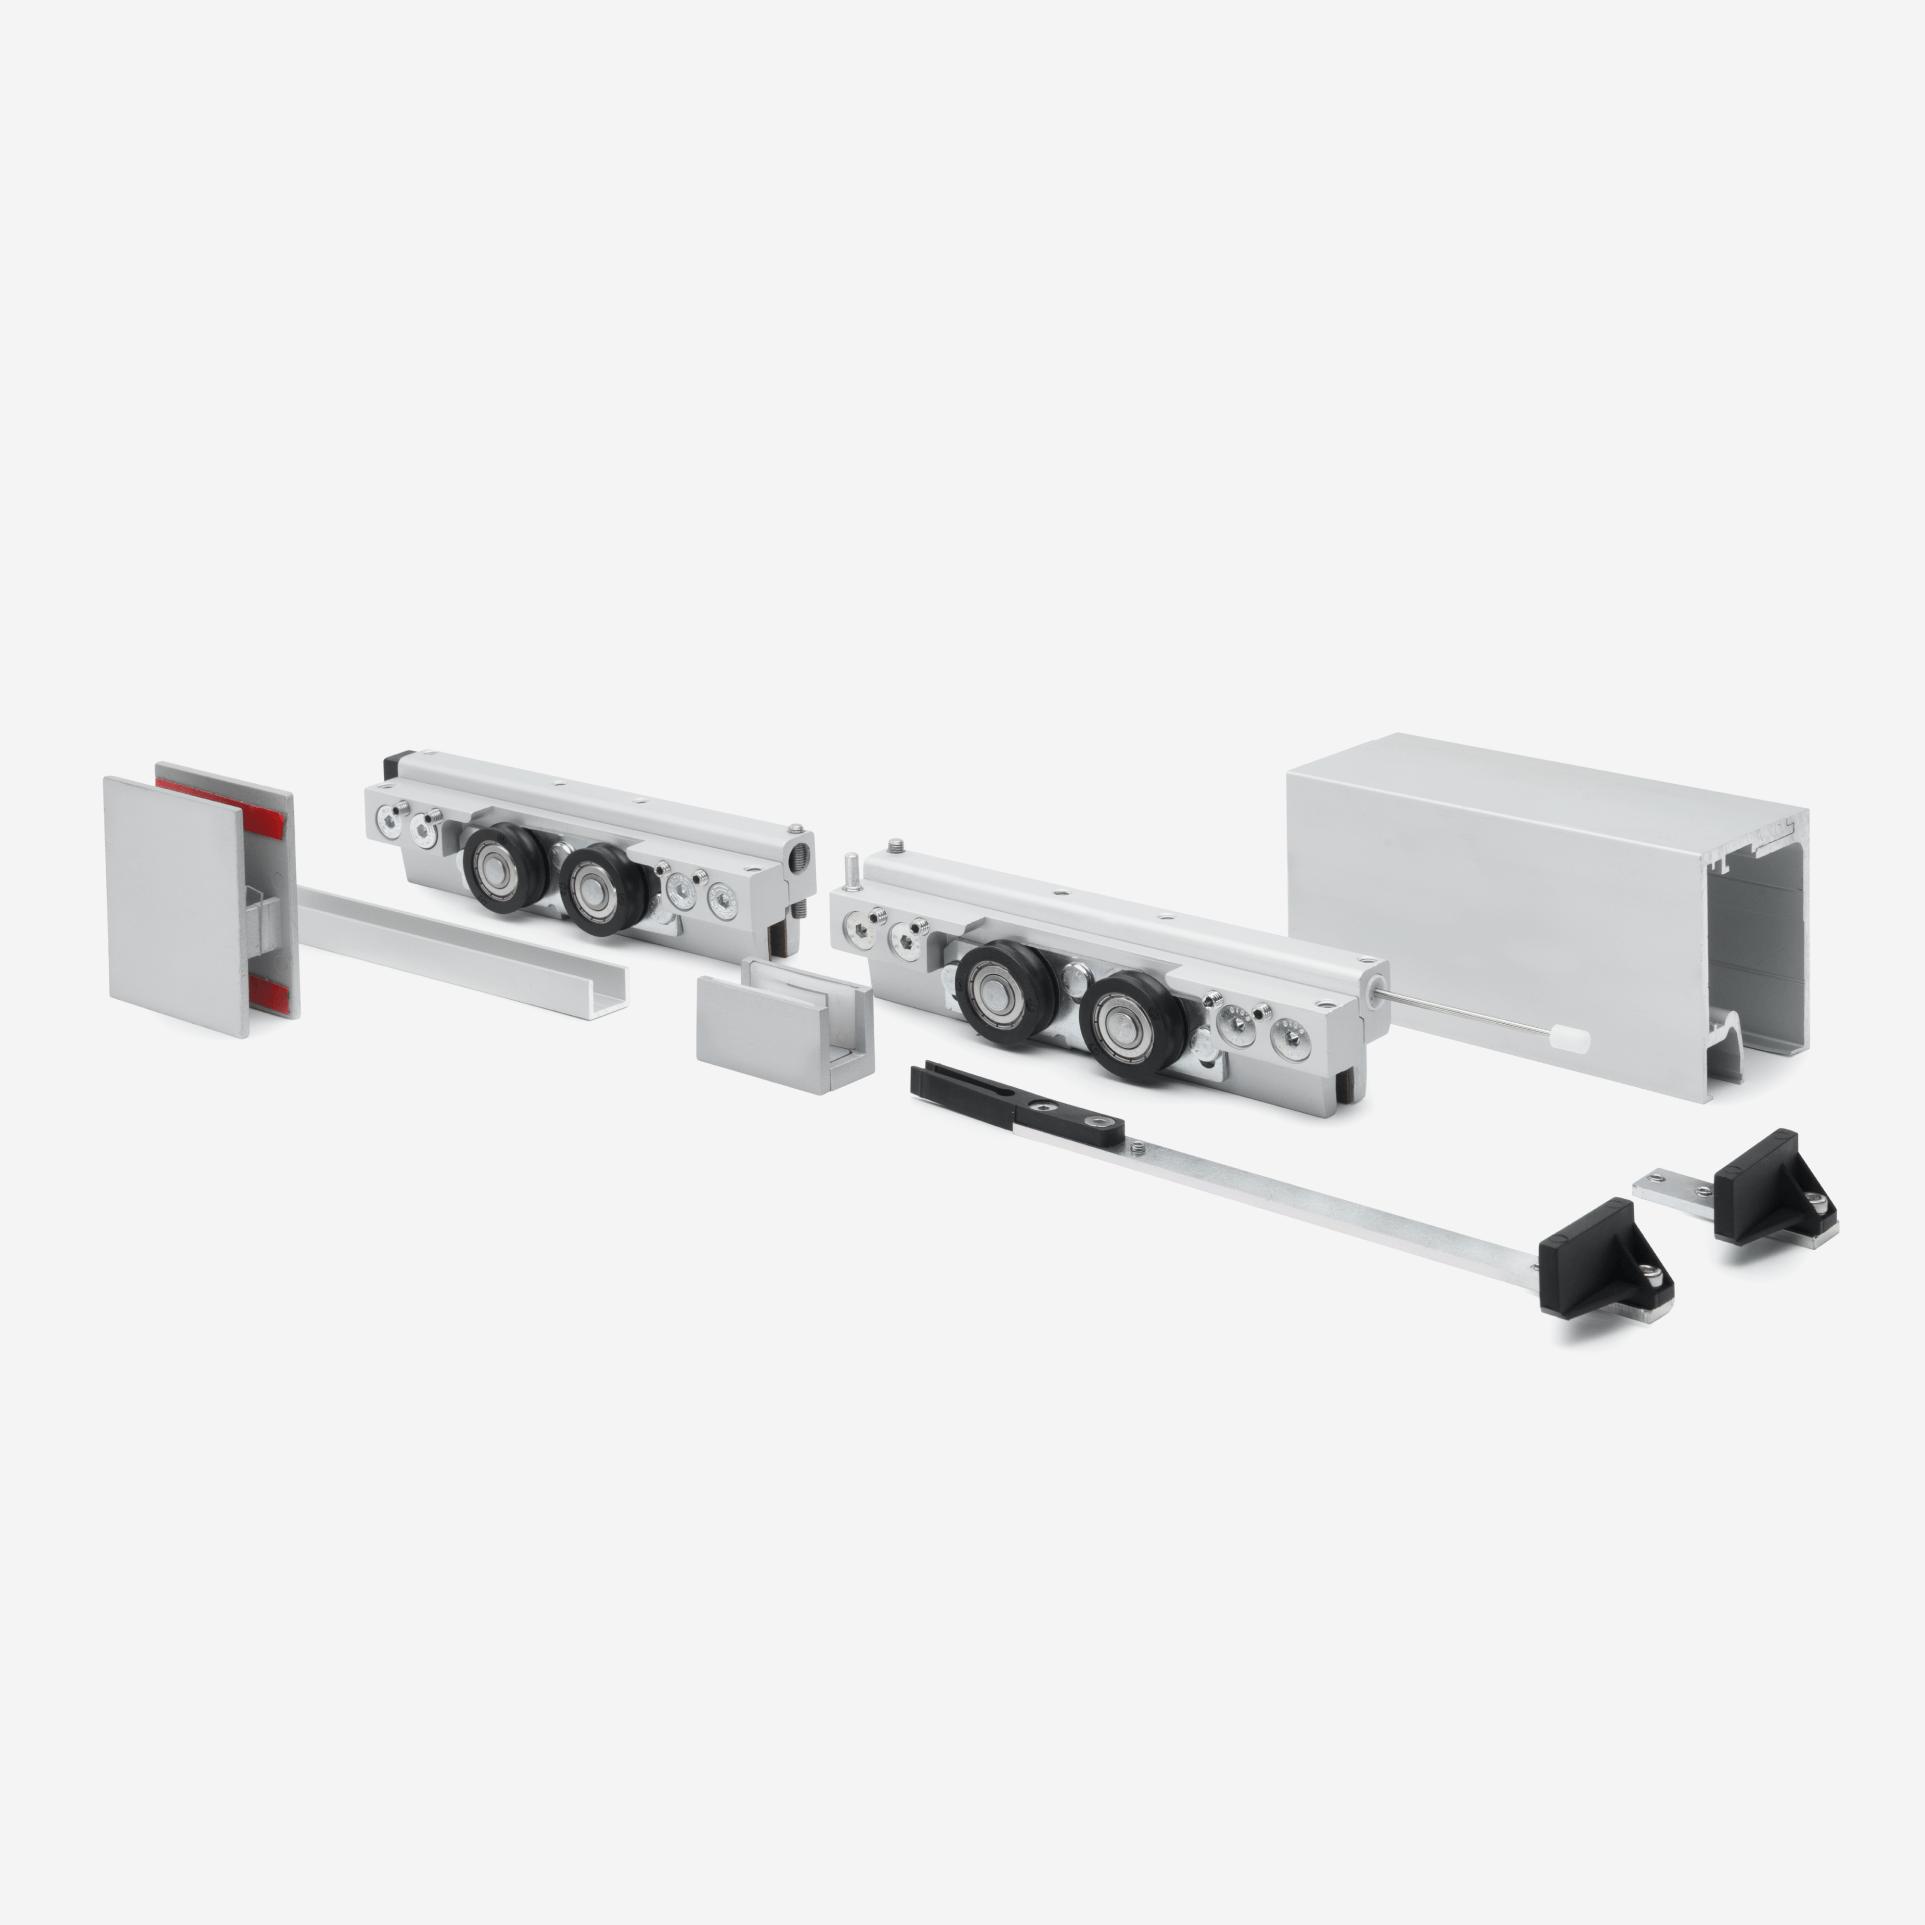 CGS-200 Wall or Ceiling Mount Sliding Door and Fixed Panel Kit with Anti-Shock Mechanism and 118" Track